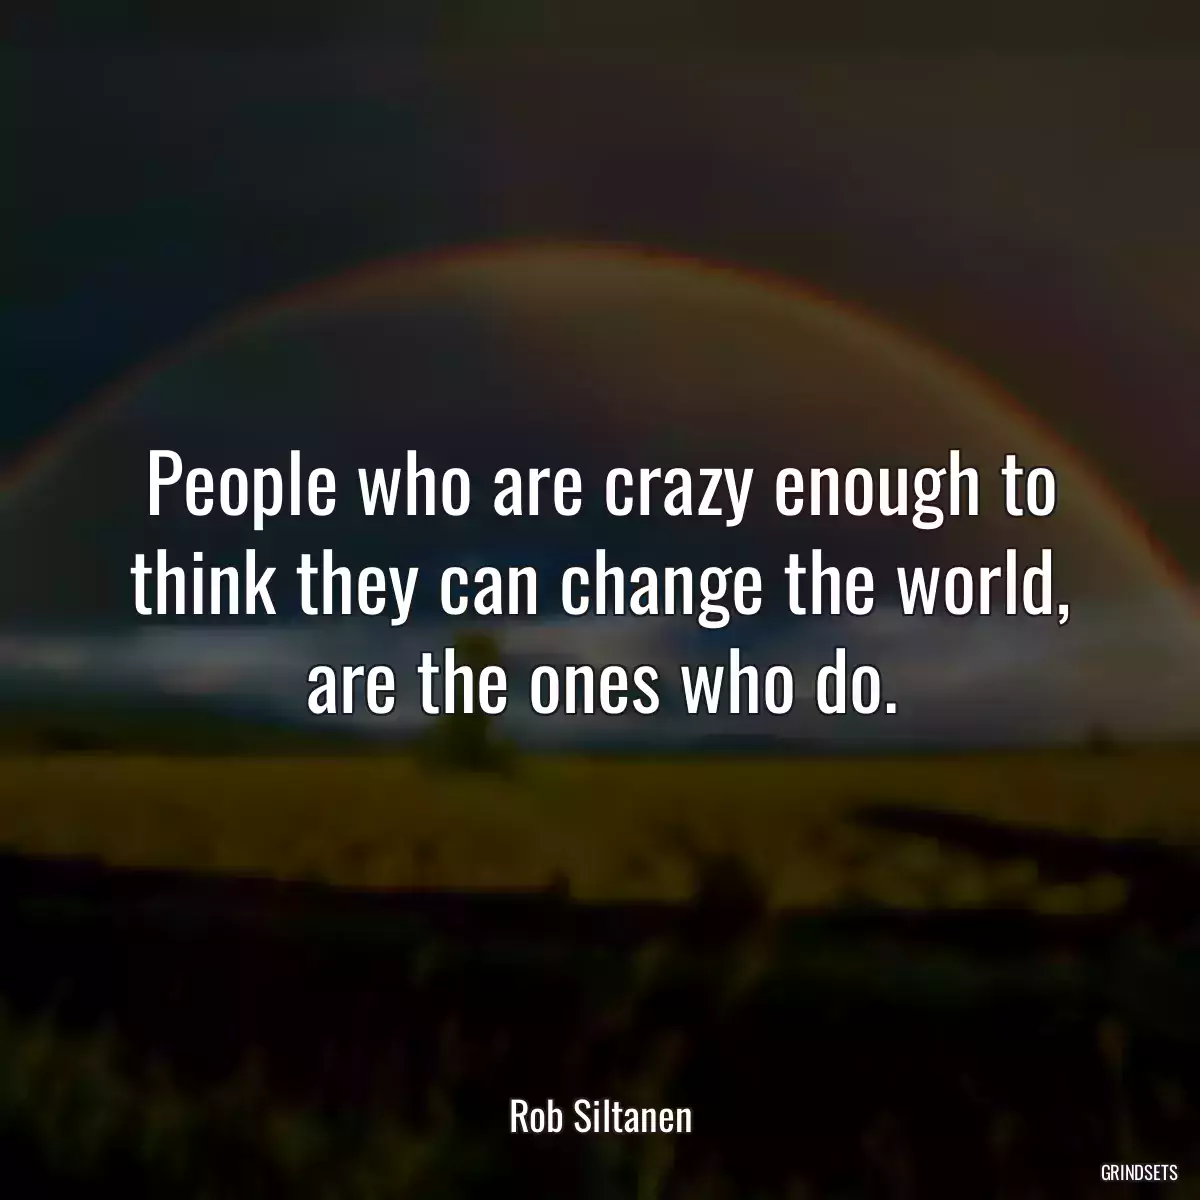 People who are crazy enough to think they can change the world, are the ones who do.